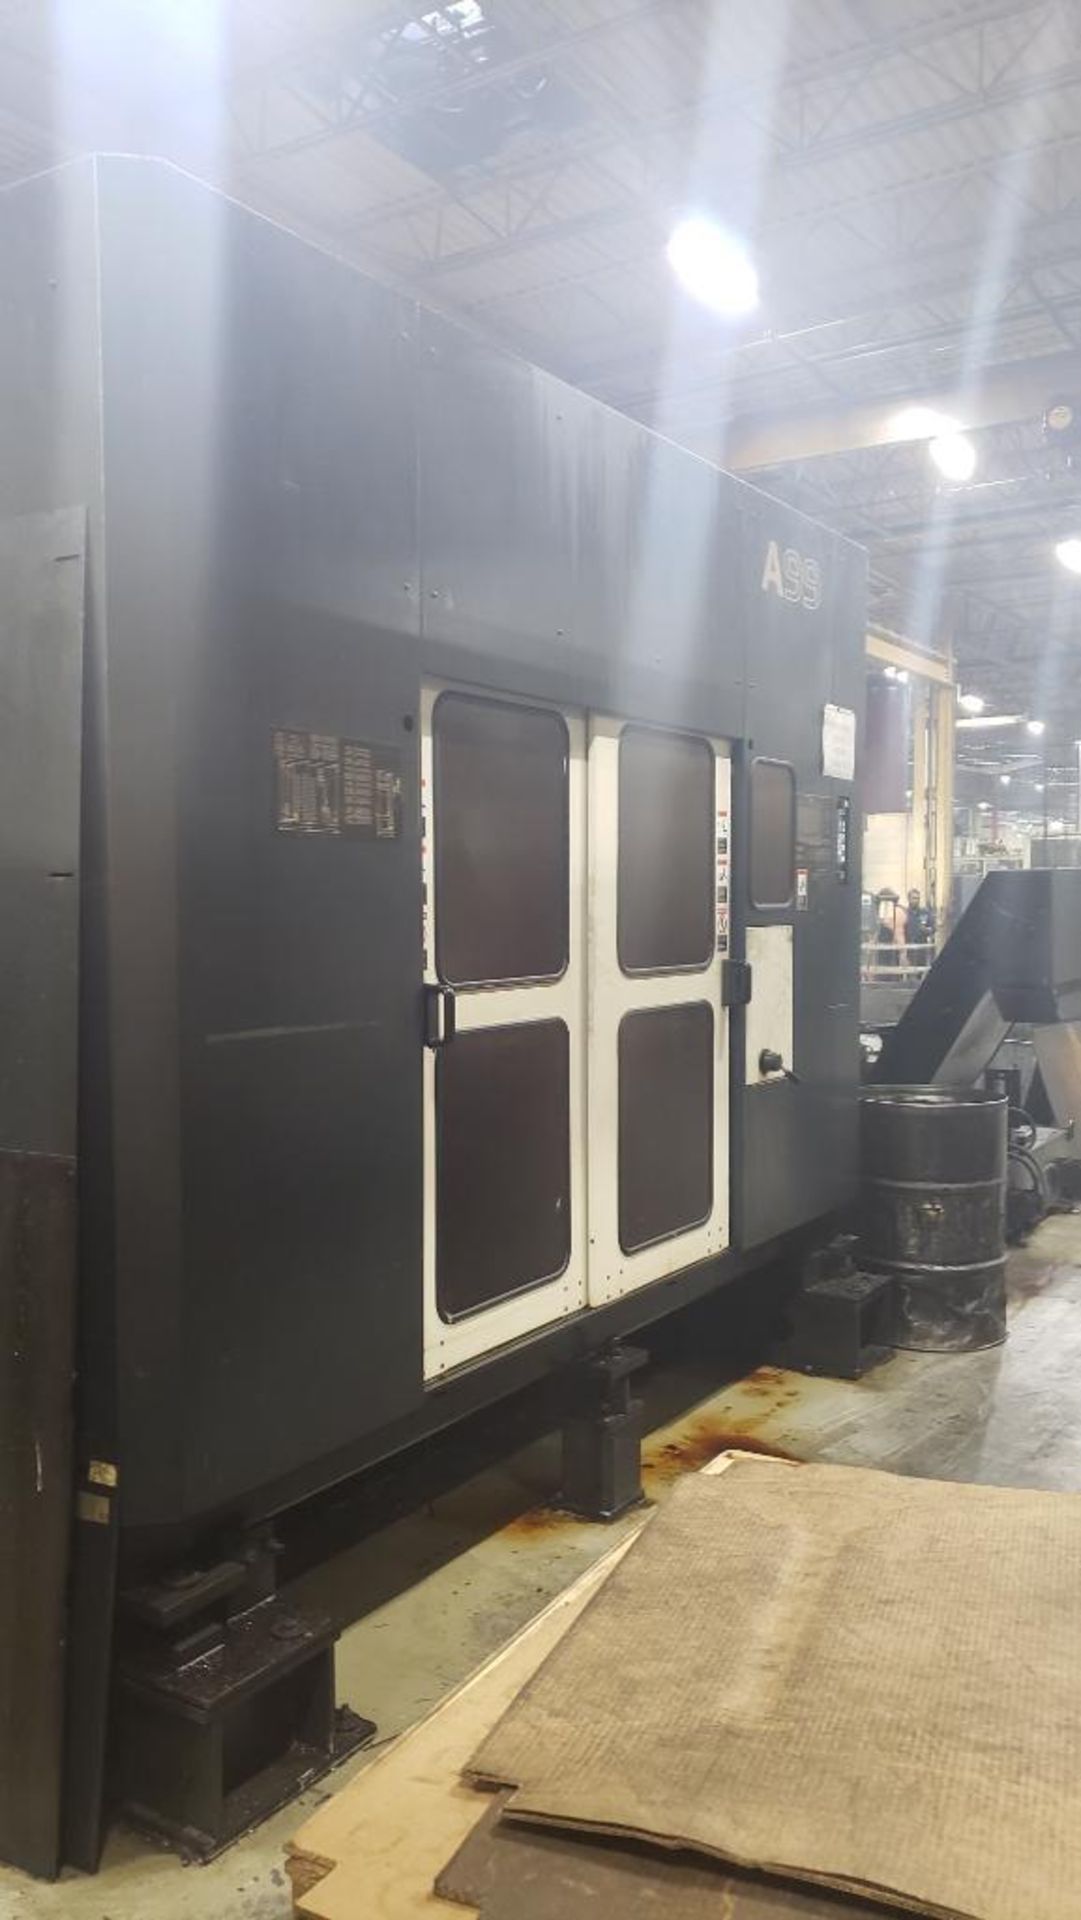 Makino A-99 Dual Pallet with 4-Axis Horizontal Machining Center - Image 12 of 15